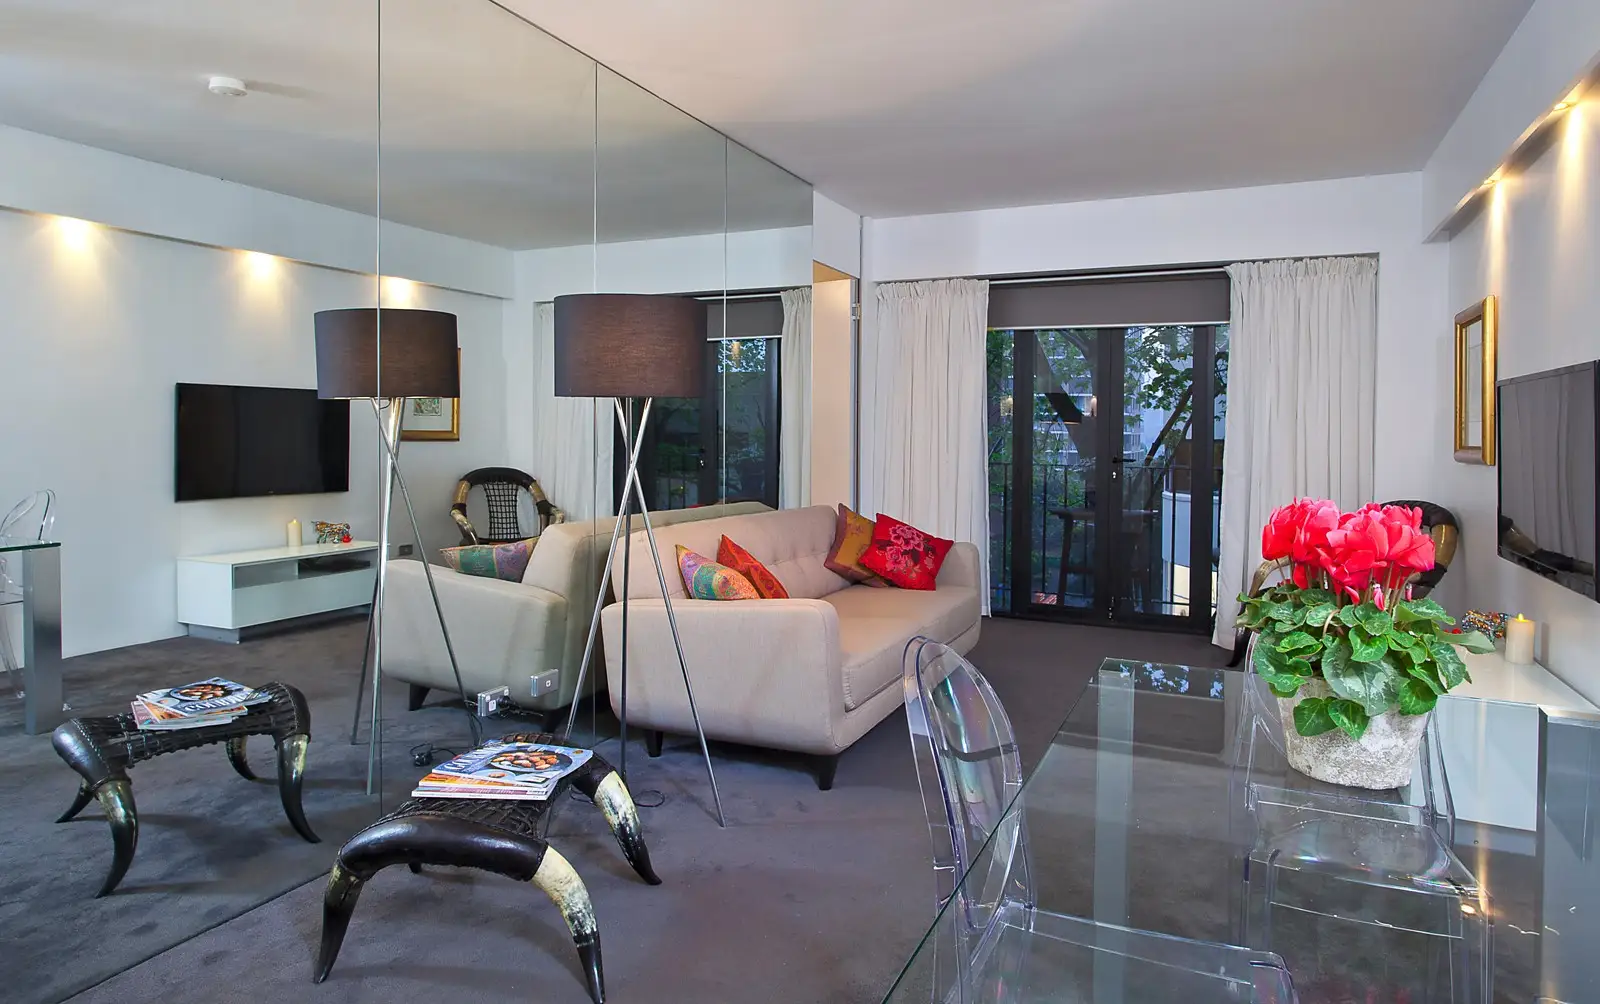 Photo #1: 320/50 Macleay Street, Potts Point - Sold by Sydney Sotheby's International Realty